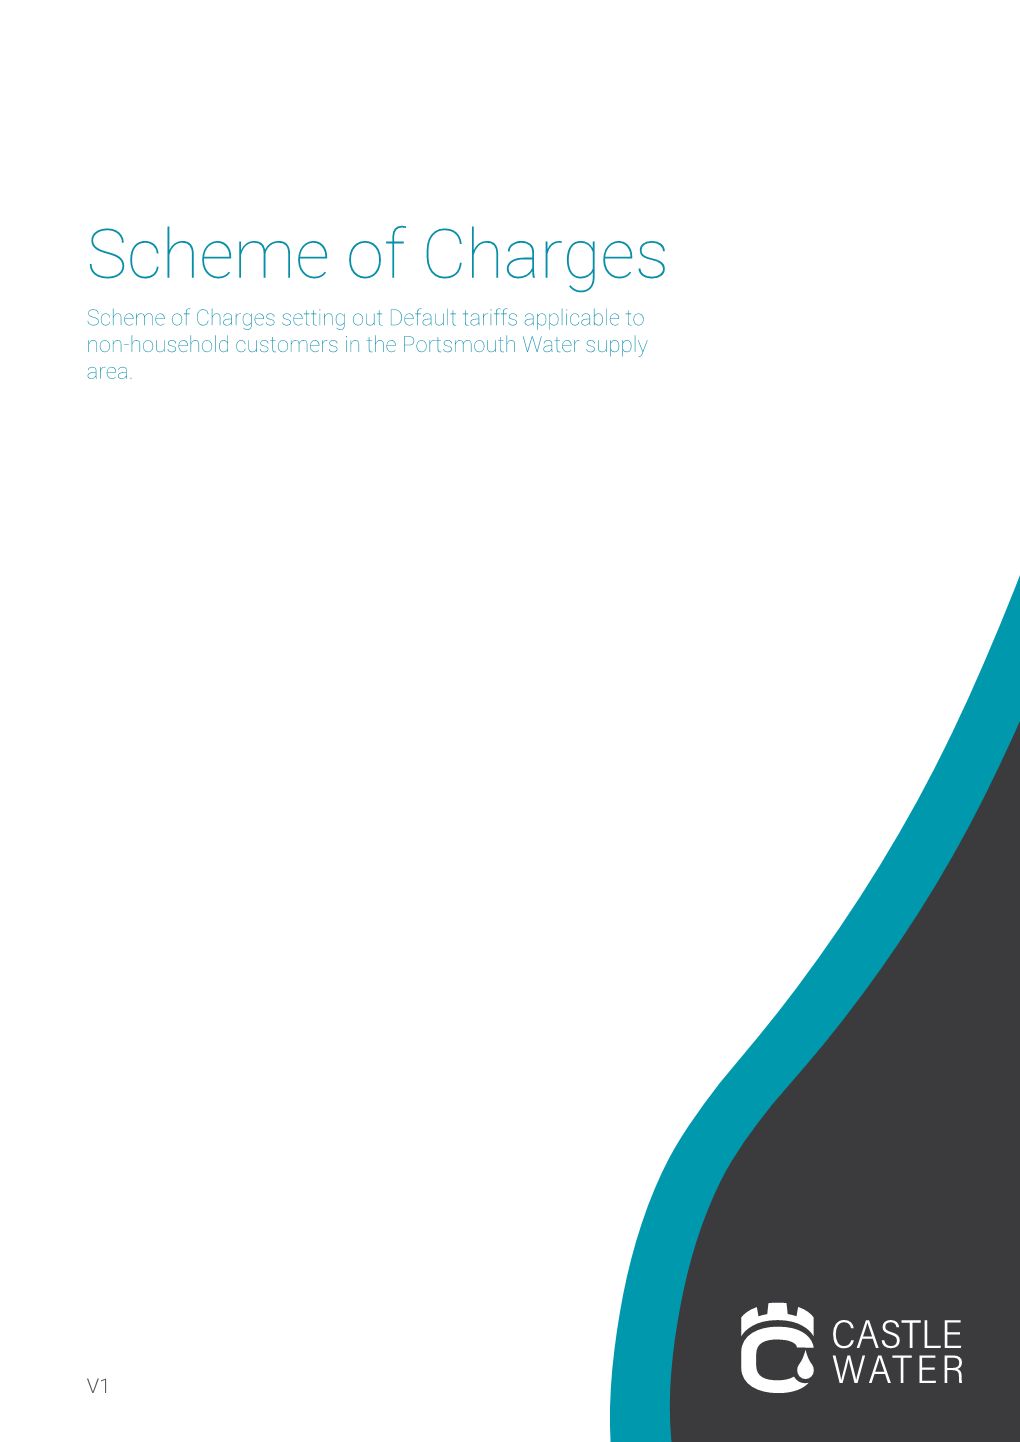 Scheme of Charges Scheme of Charges Setting out Default Tariffs Applicable to Non-Household Customers in the Portsmouth Water Supply Area